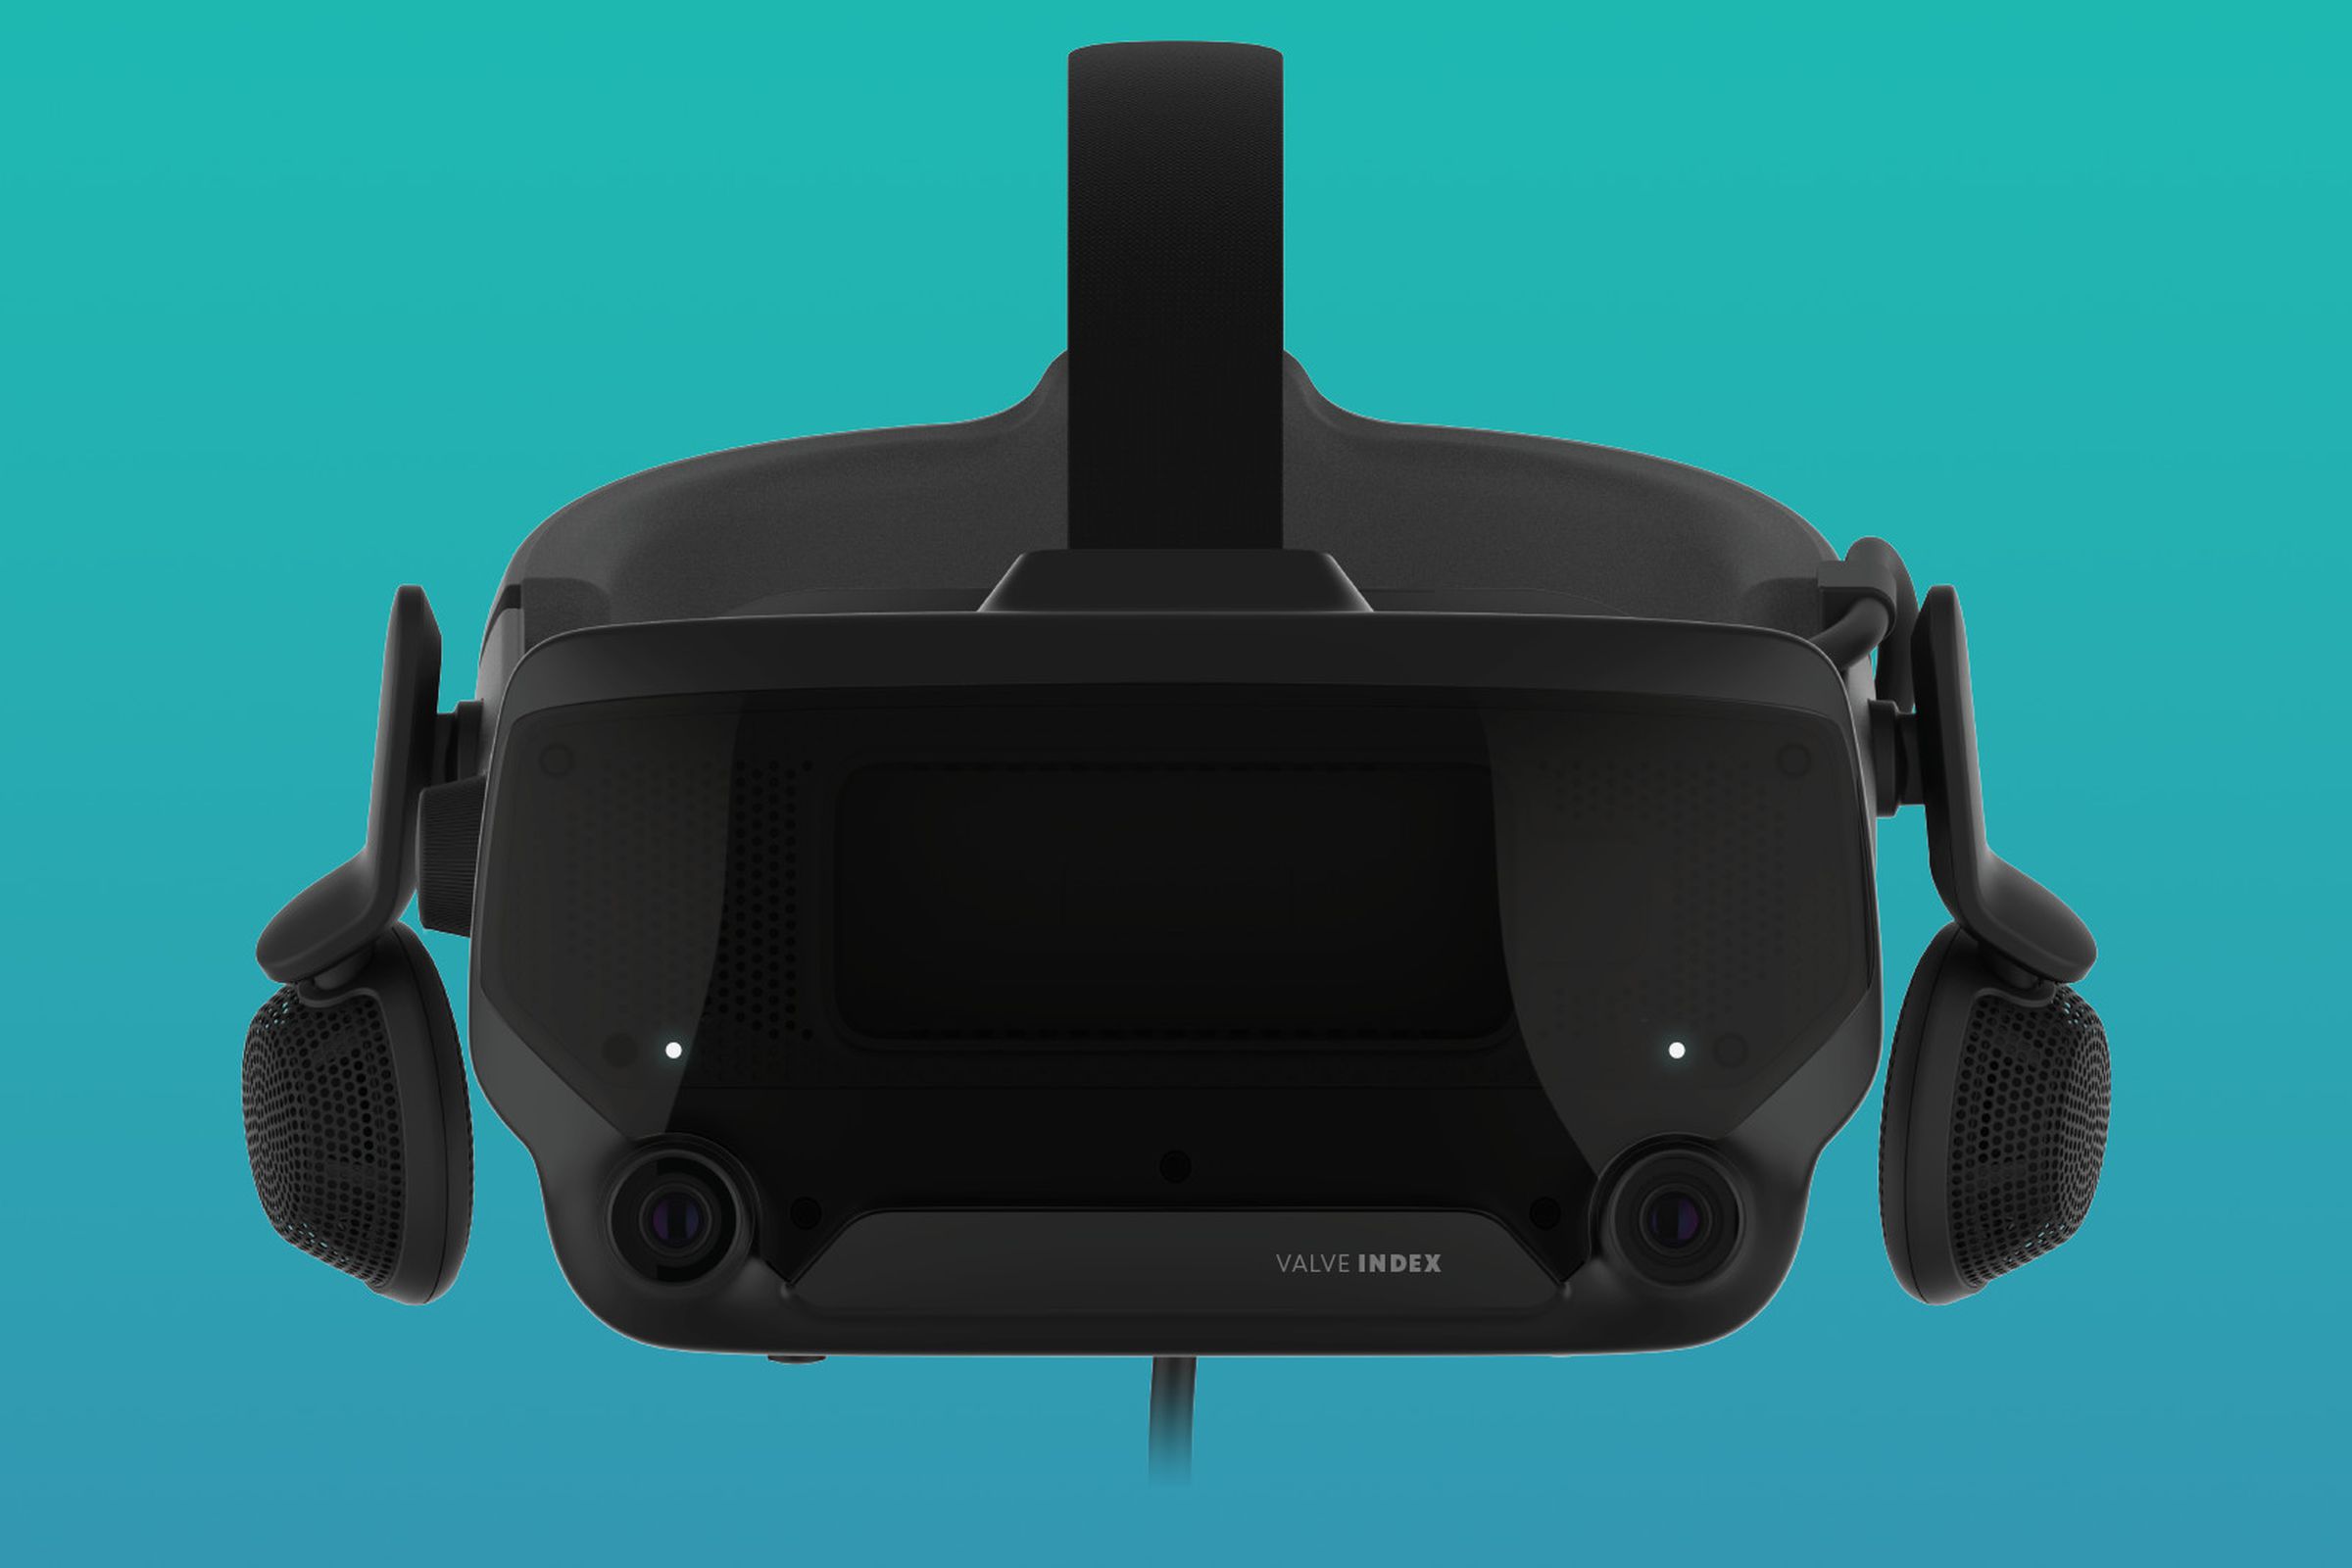 The Valve Index VR headset in its full form. 